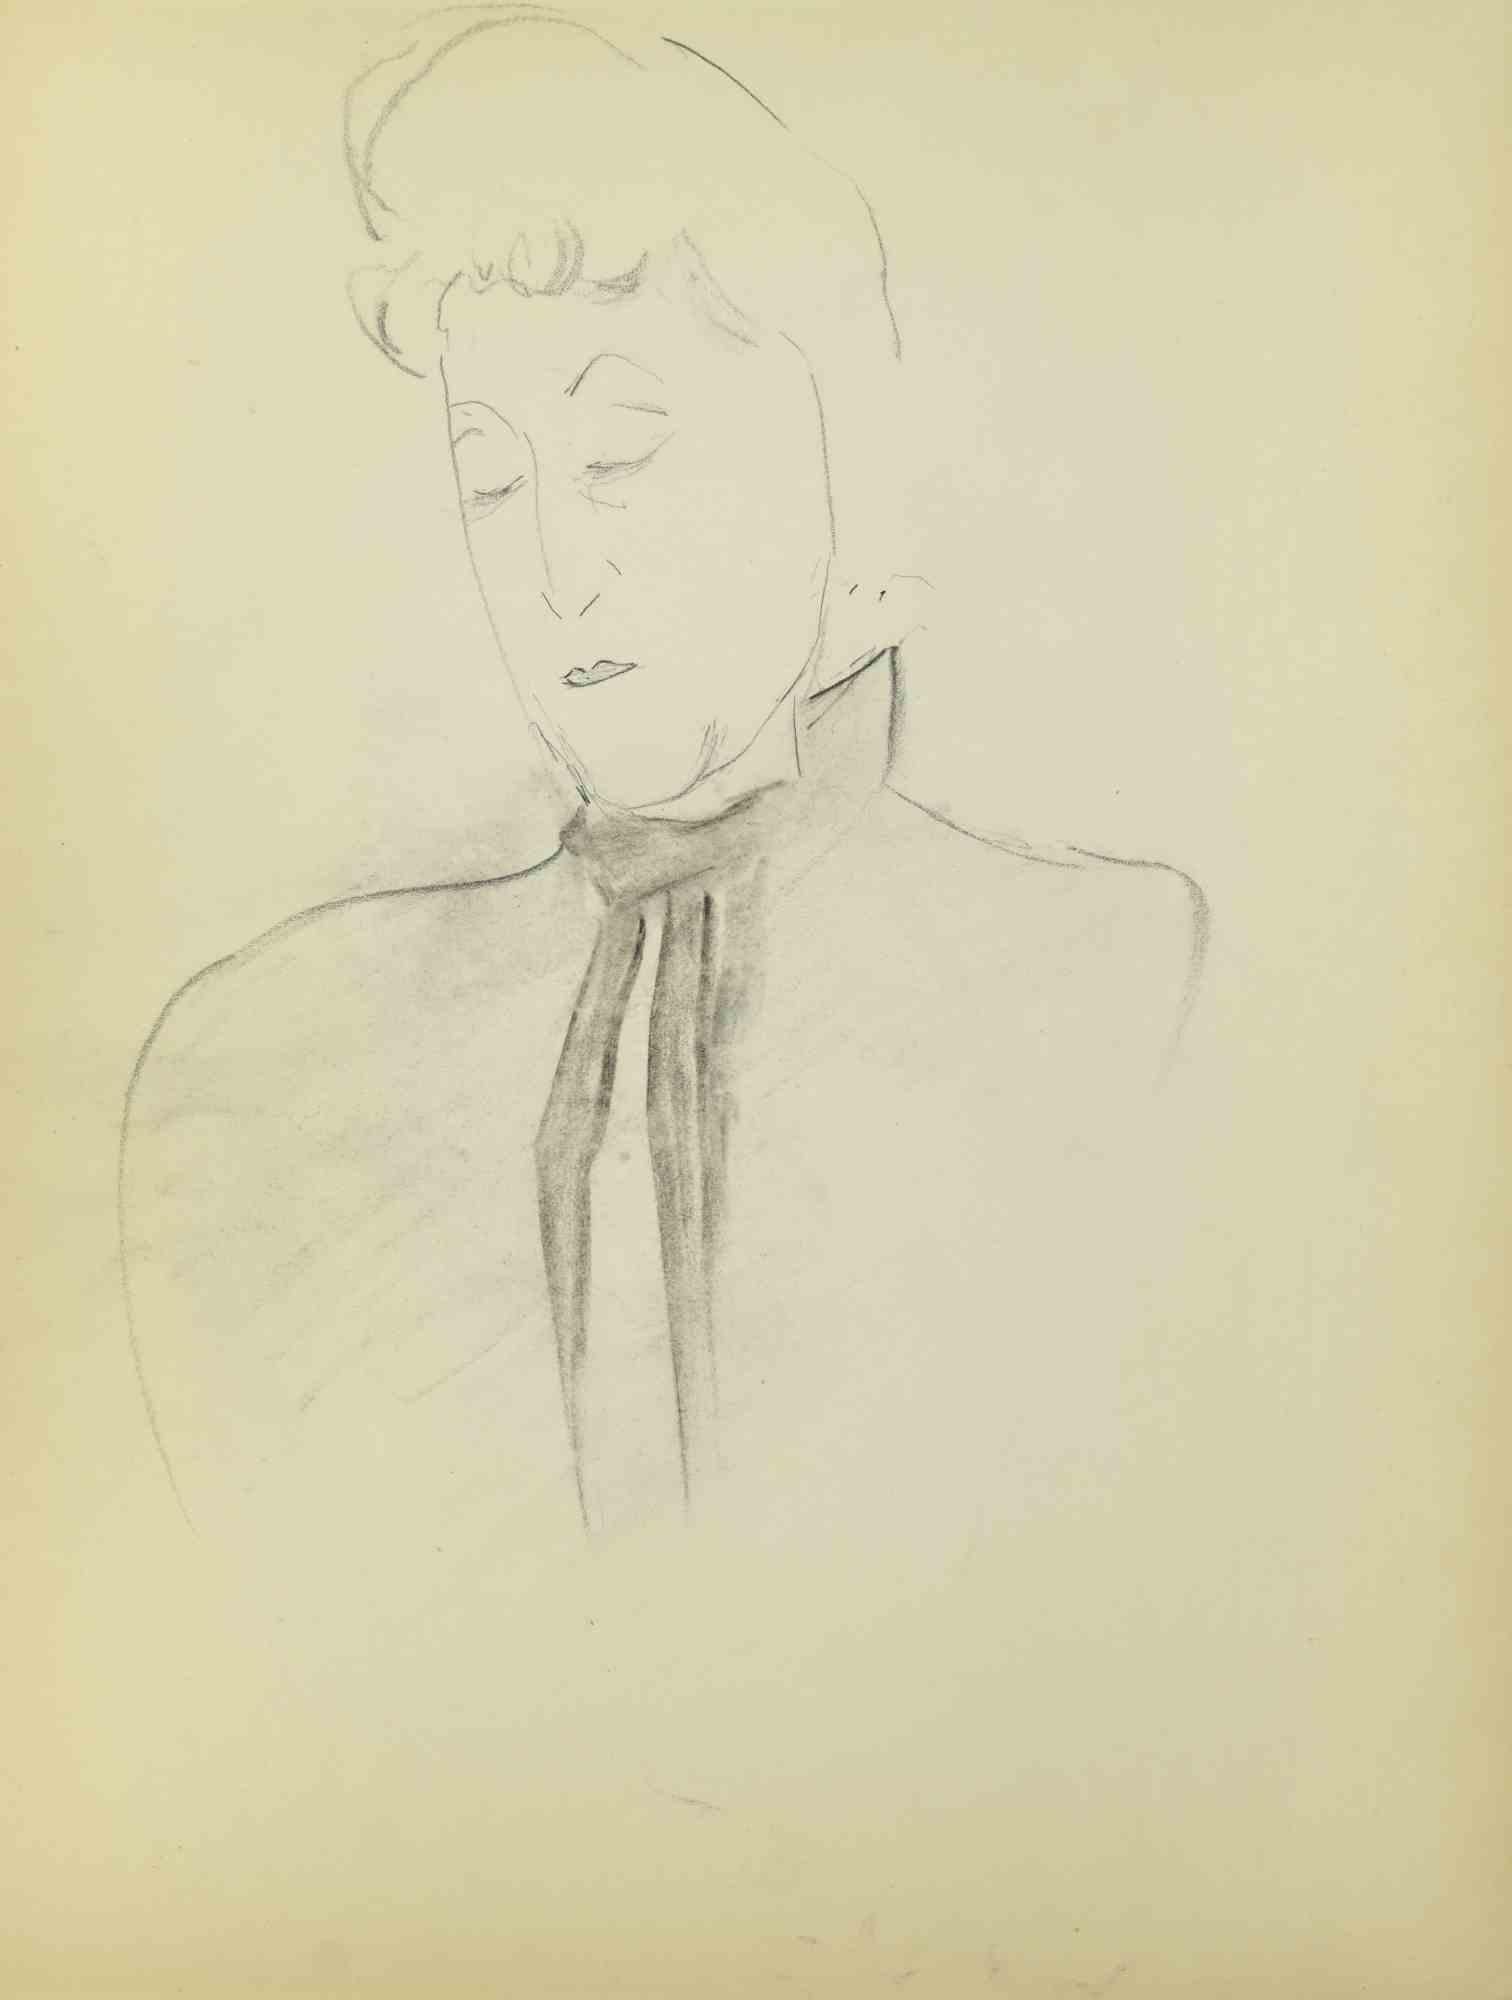 Sketch for a Portrait is a drawing on paper realized in the Mid-20th Century by Flor David.

Good conditions.

Flor David (1891-1958) ):  pseudonym of David Florence. Pastel painter. He was a pupil of Desirè Lucas. He exhibited at the Salon des